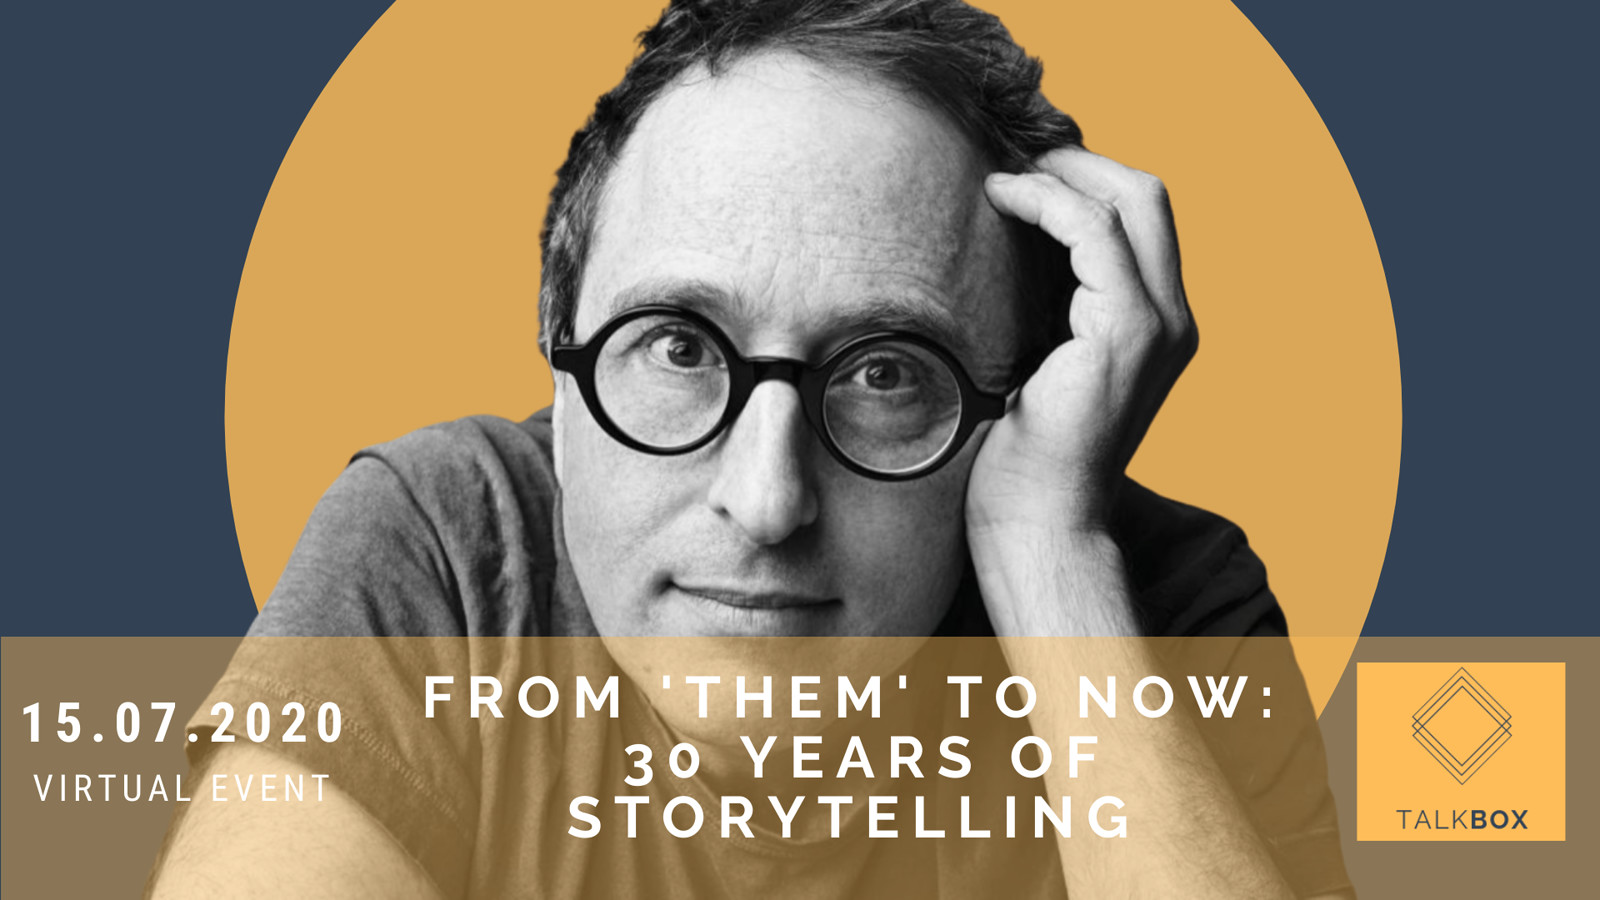 From 'Them' to Now by Jon Ronson at Online